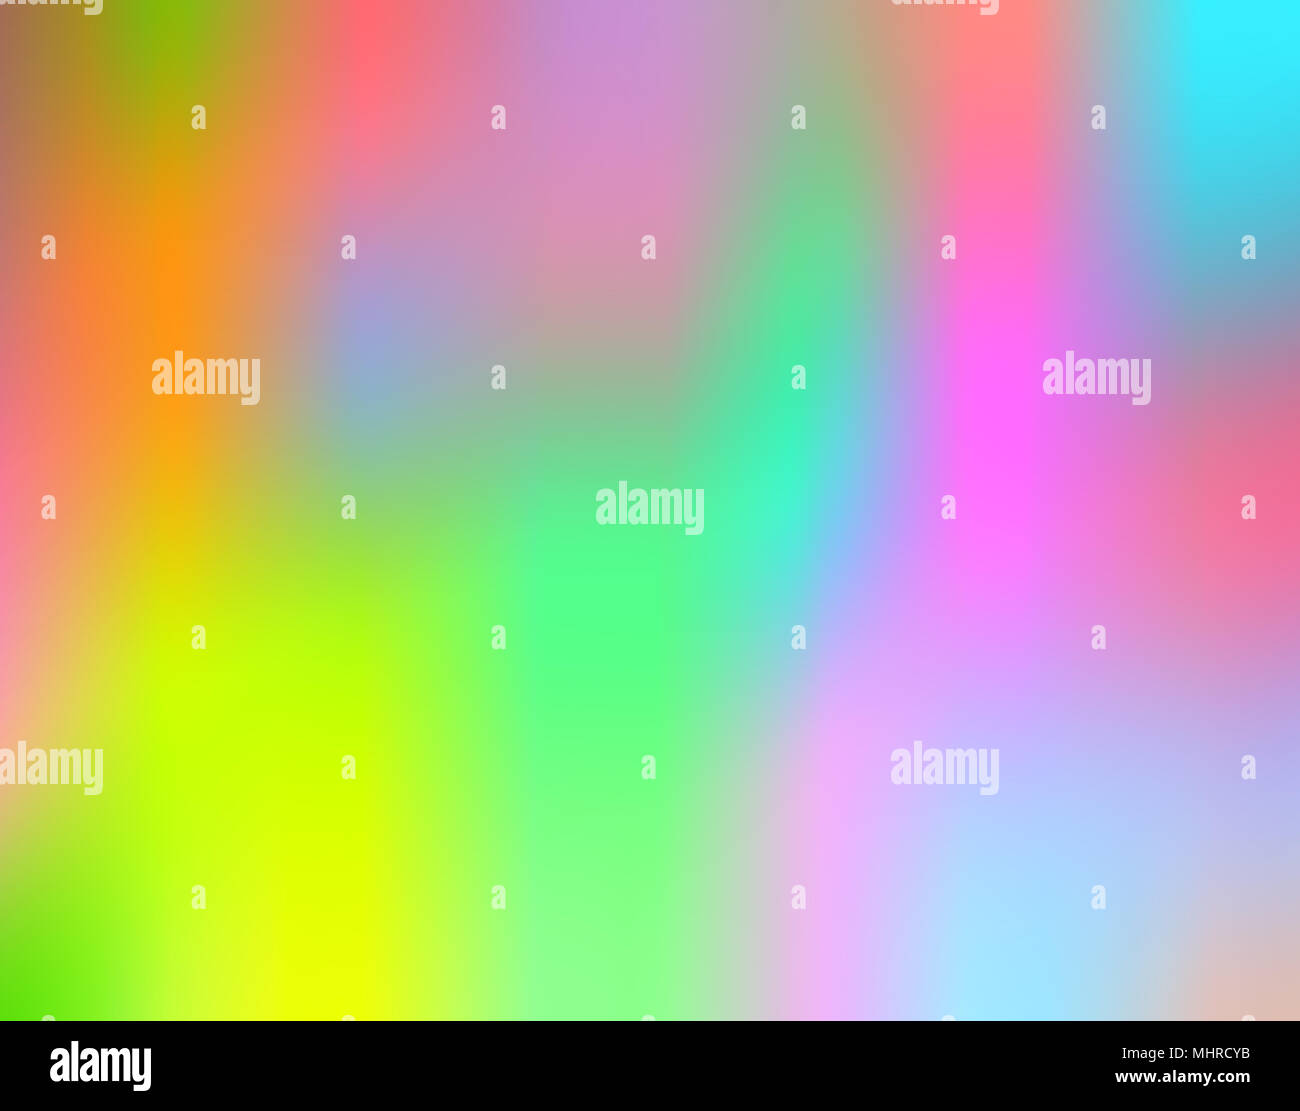 colorful abstract background Stock Photo